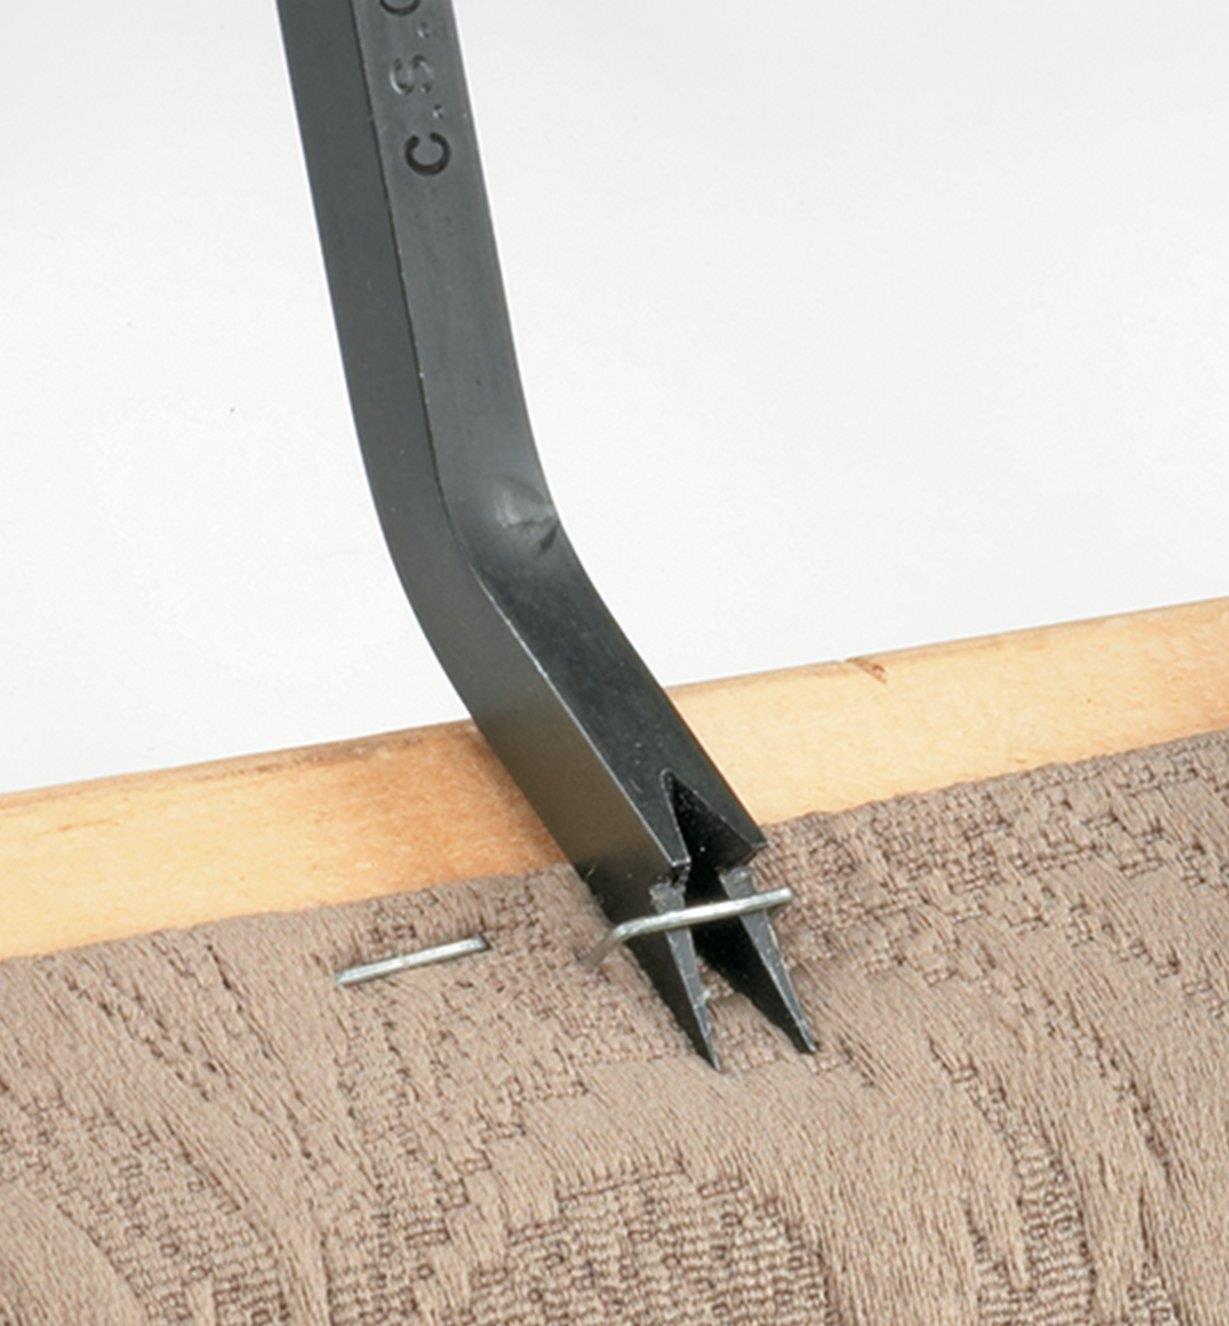 Lifting out furniture staples using the Staple Lifter